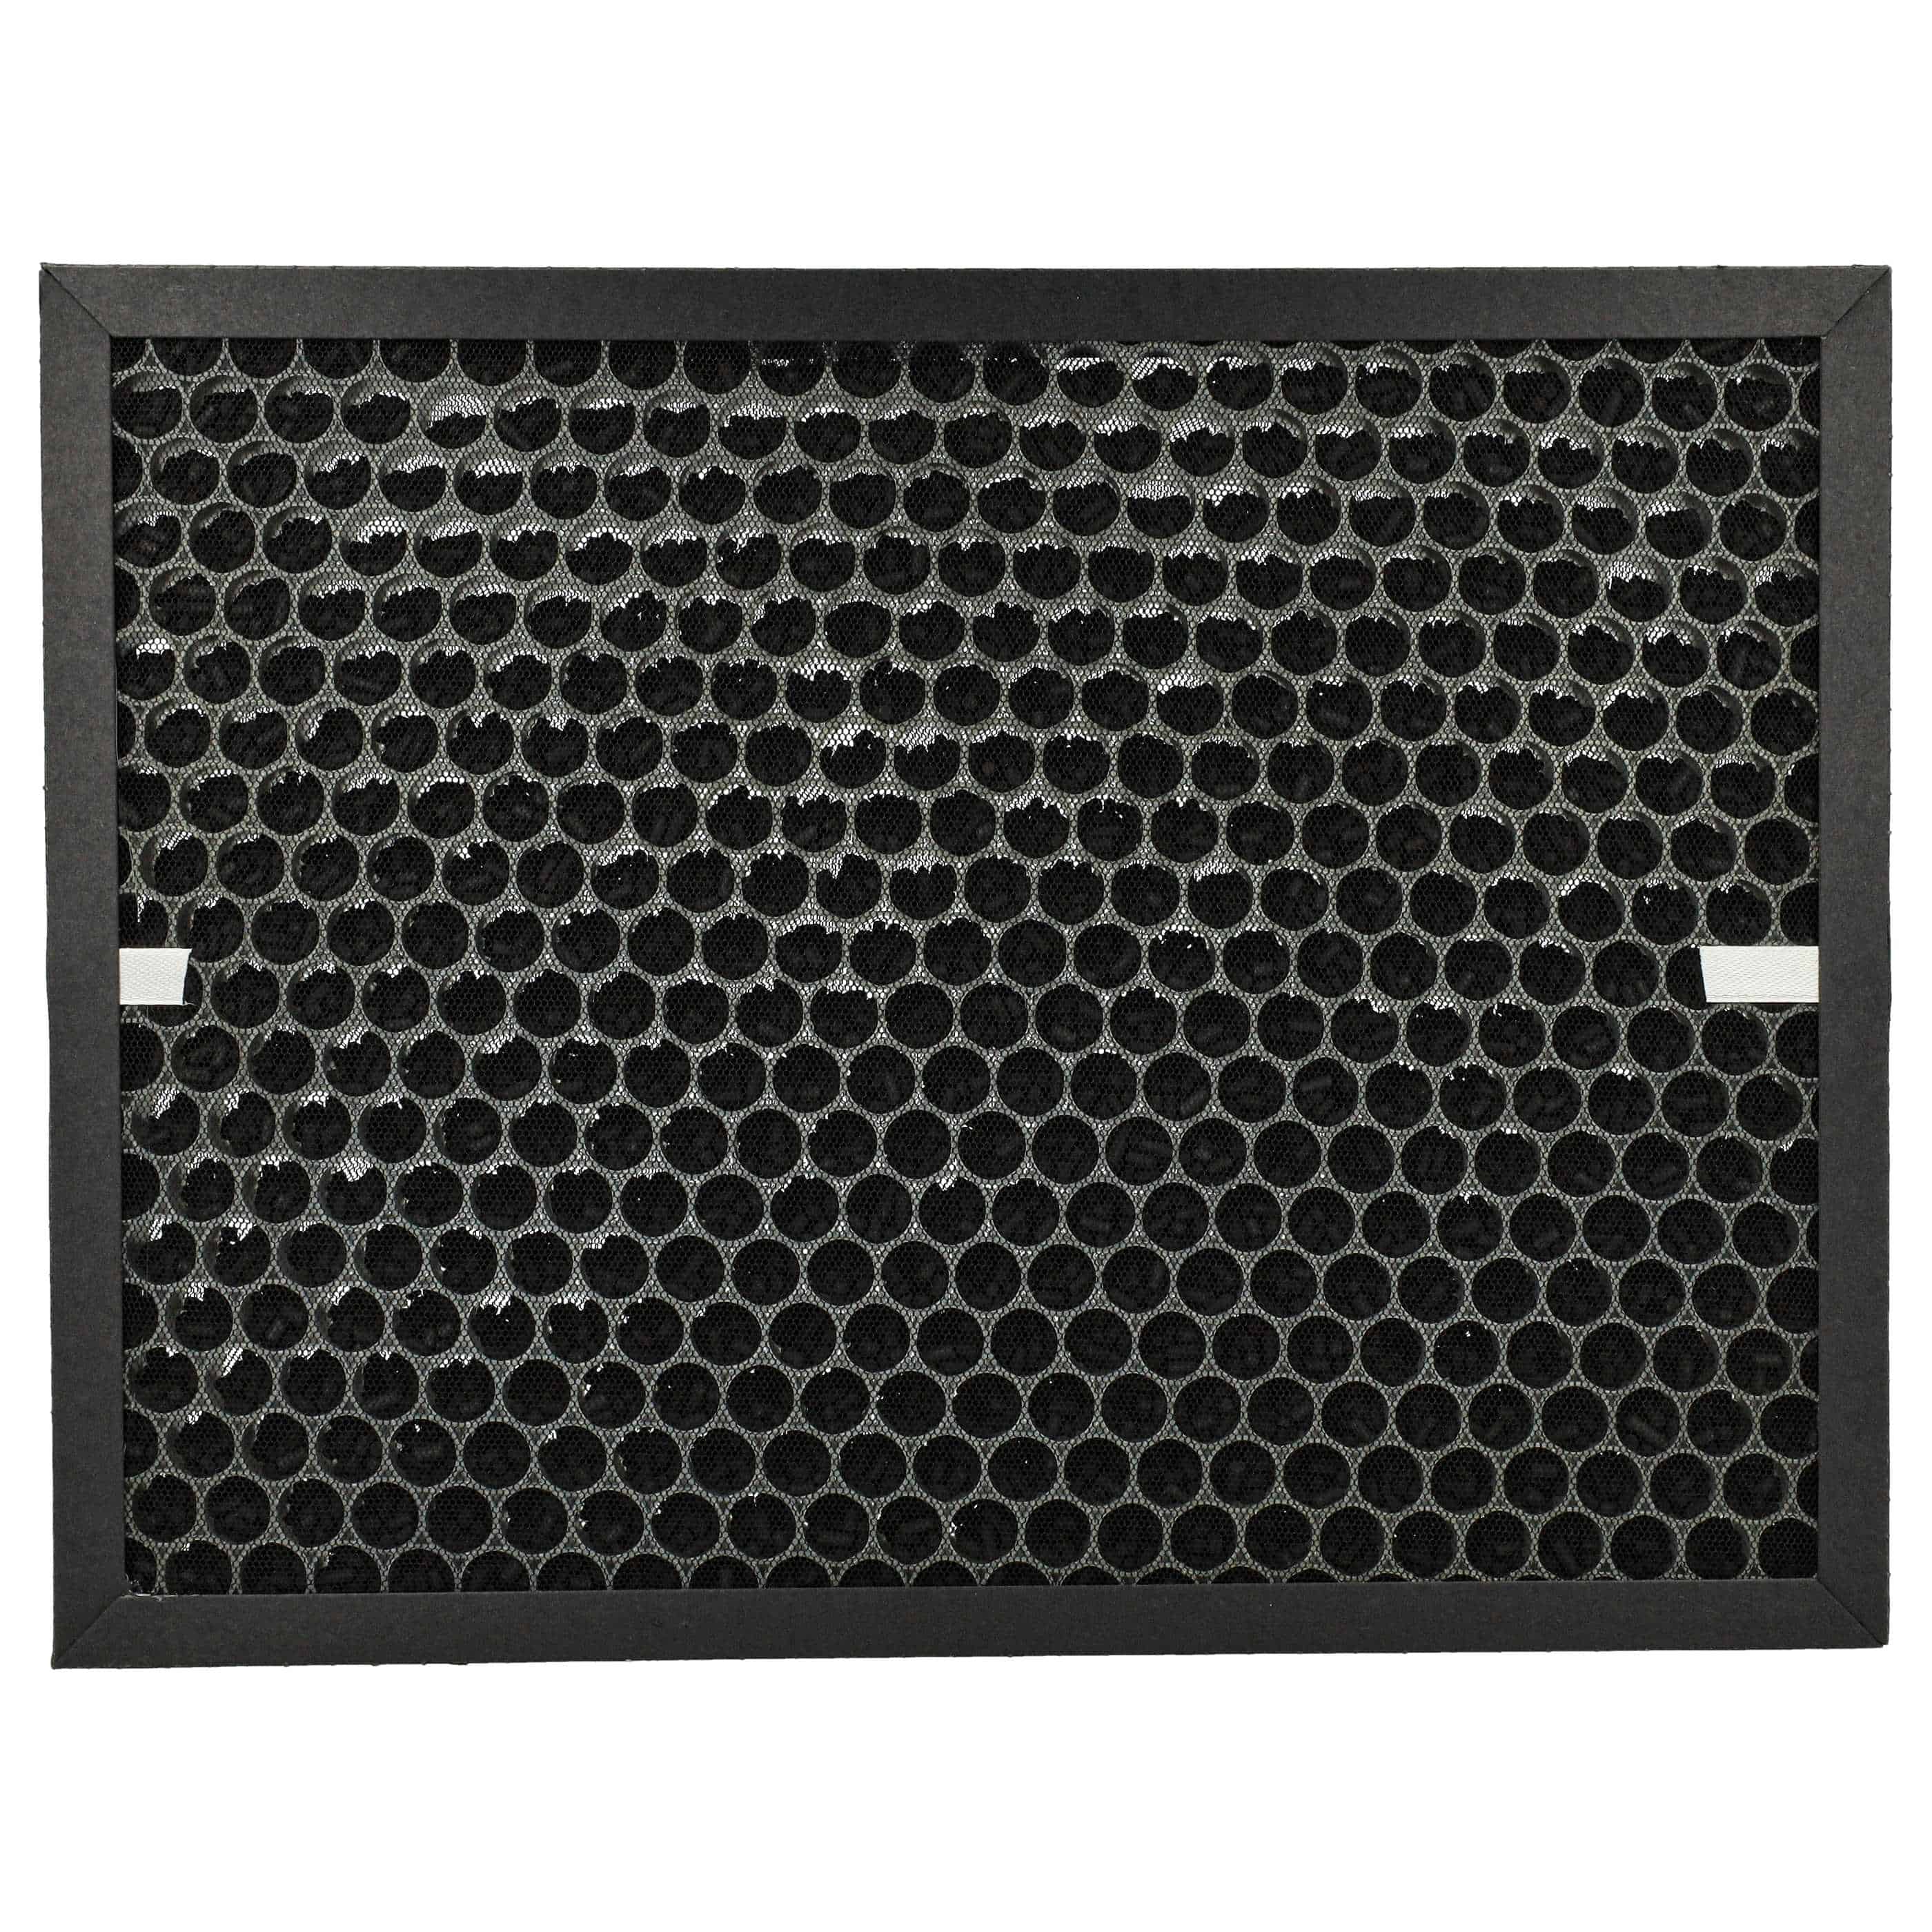 Activated Carbon Filter replaces Honeywell HRF-L710E for Honeywell Air Purifier - Air Filter